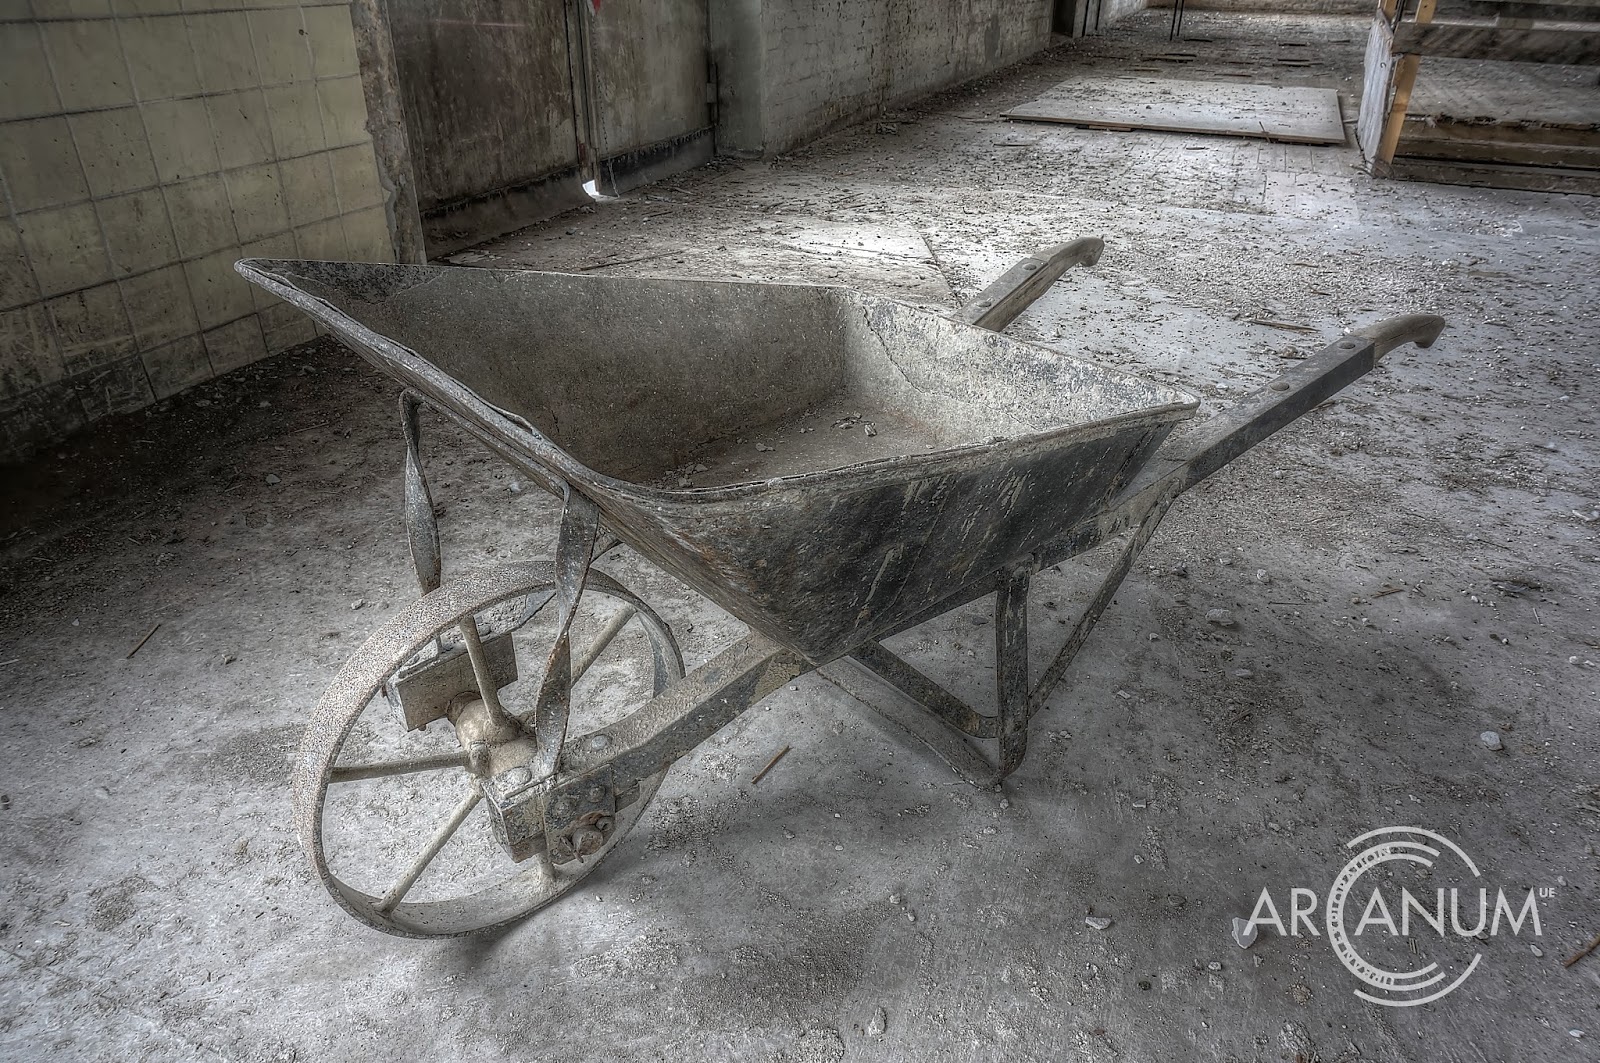 arcanum. urban exploration.: The End? - The Abandoned Rubber Factory ...